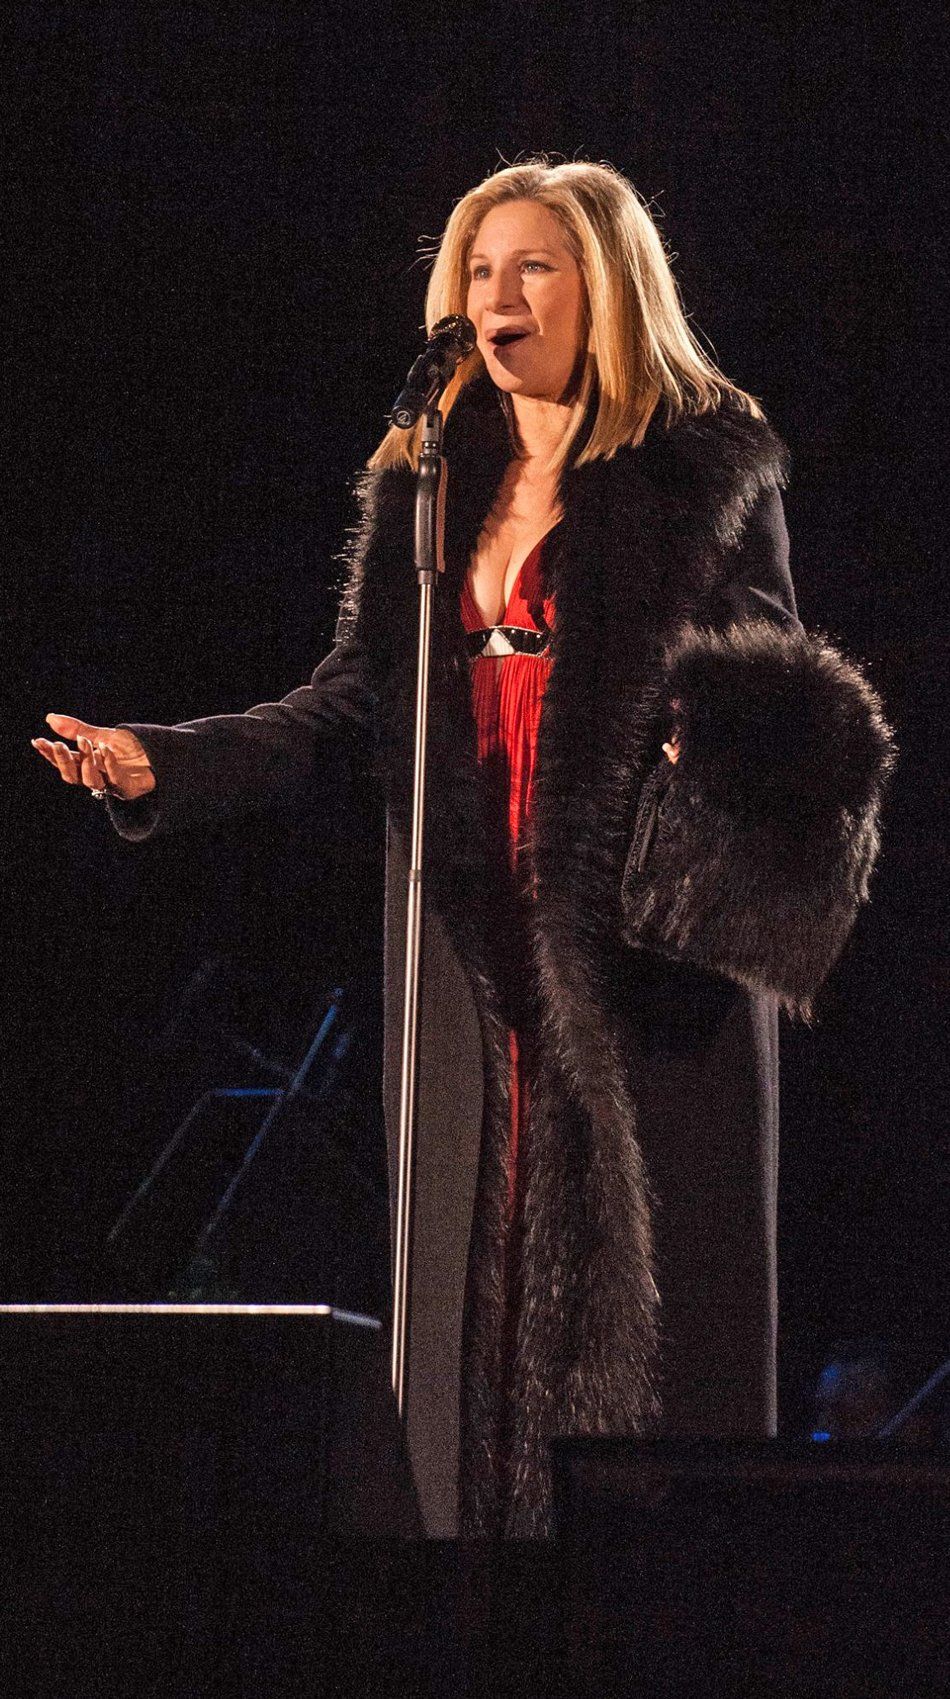 Streisand in coat at The Hollywood Bowl, November 11, 2012.